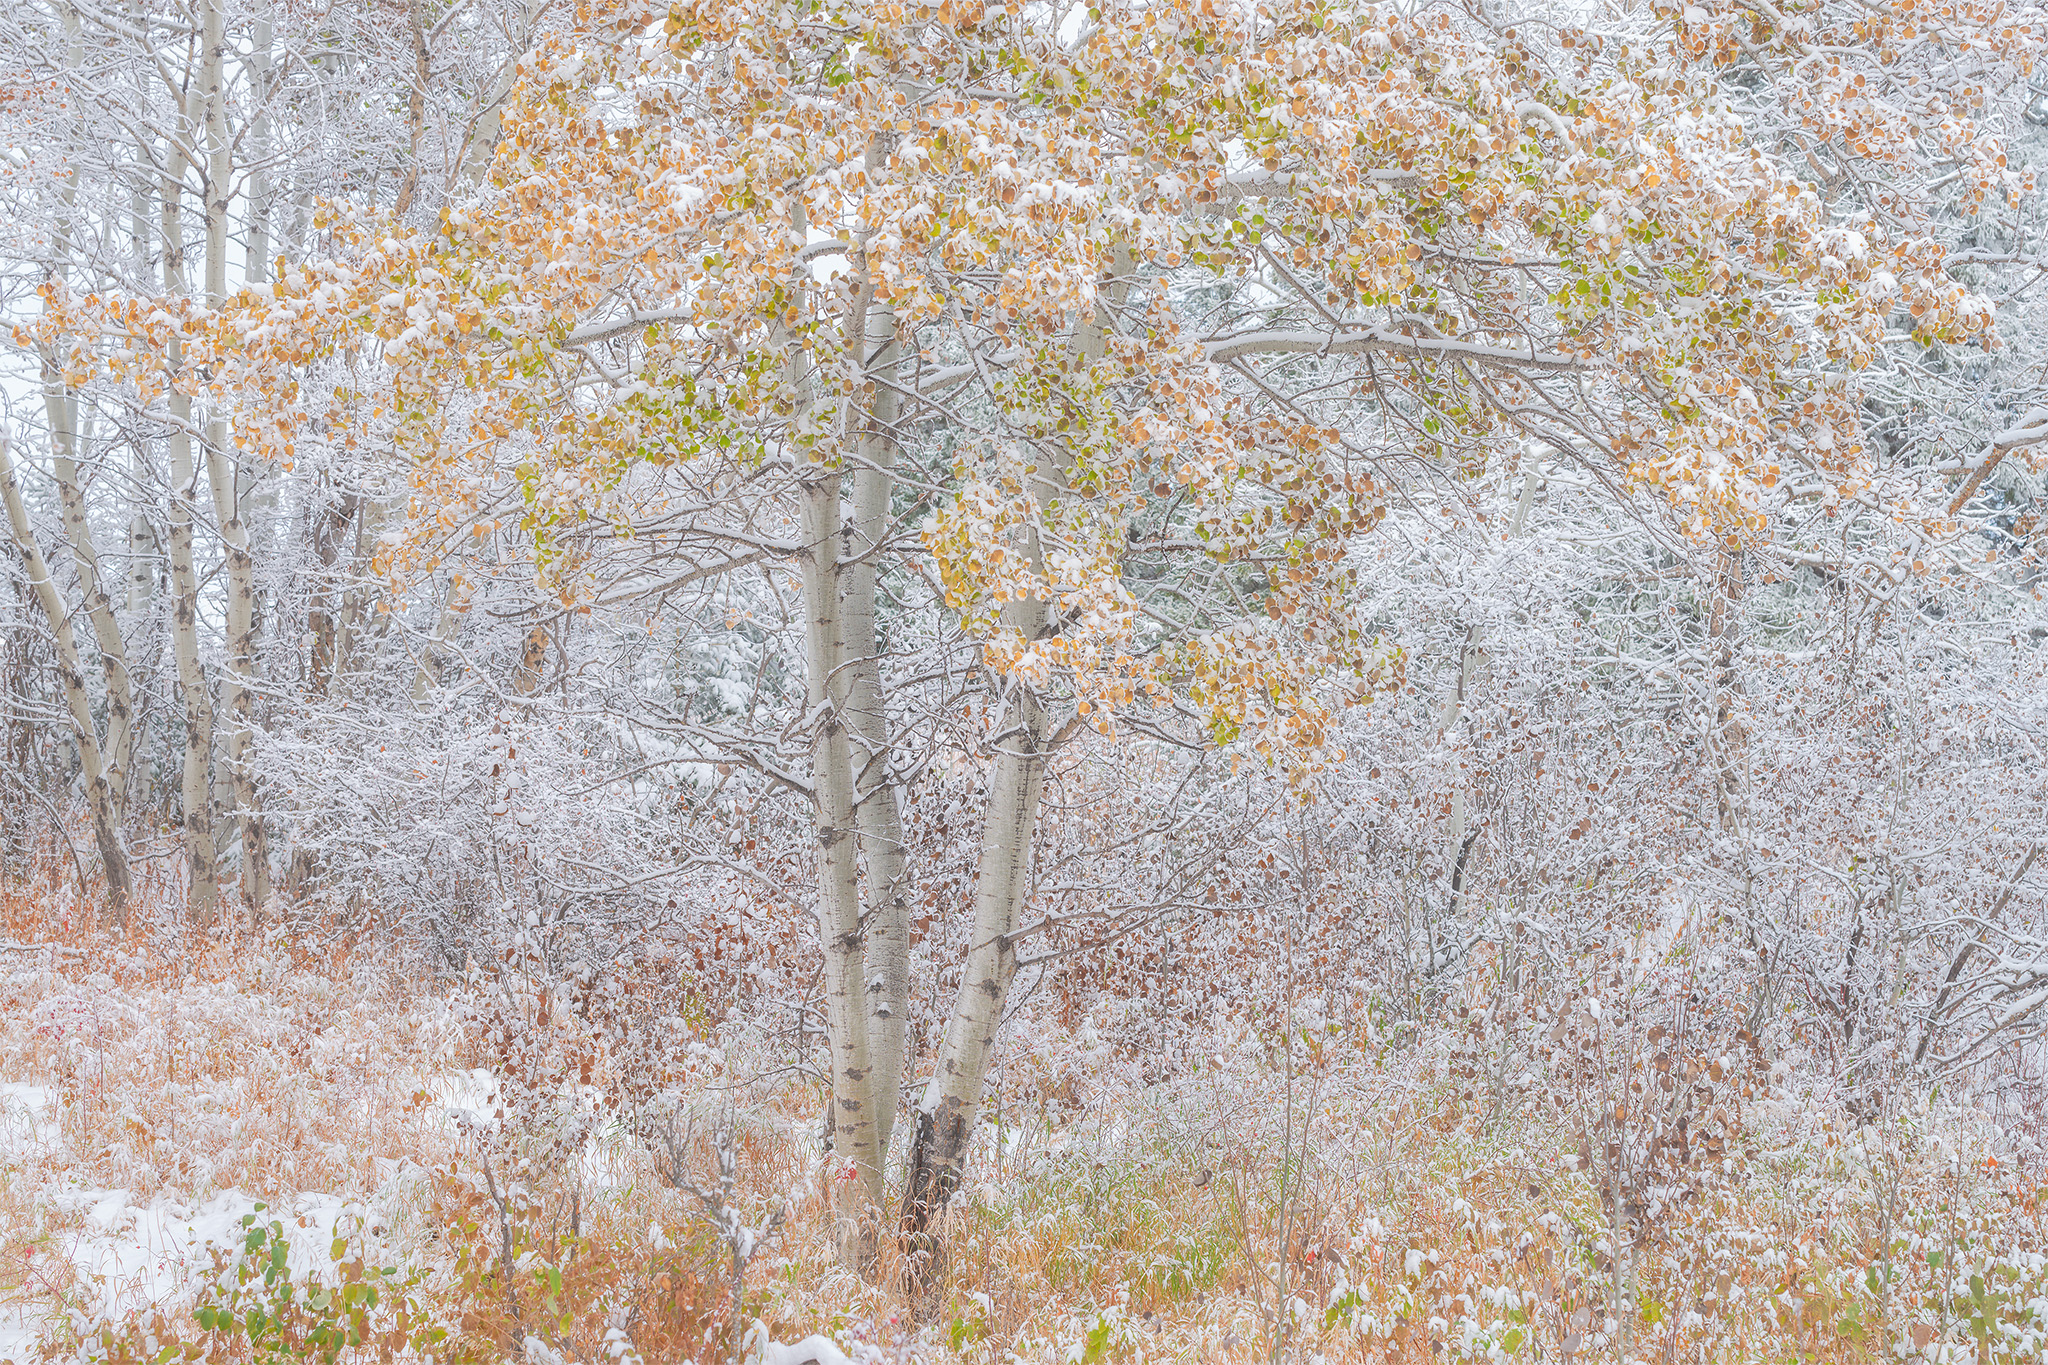 An intimate landscape photograph of an aspen tree covered in snow in fall colour in Saskatchewan